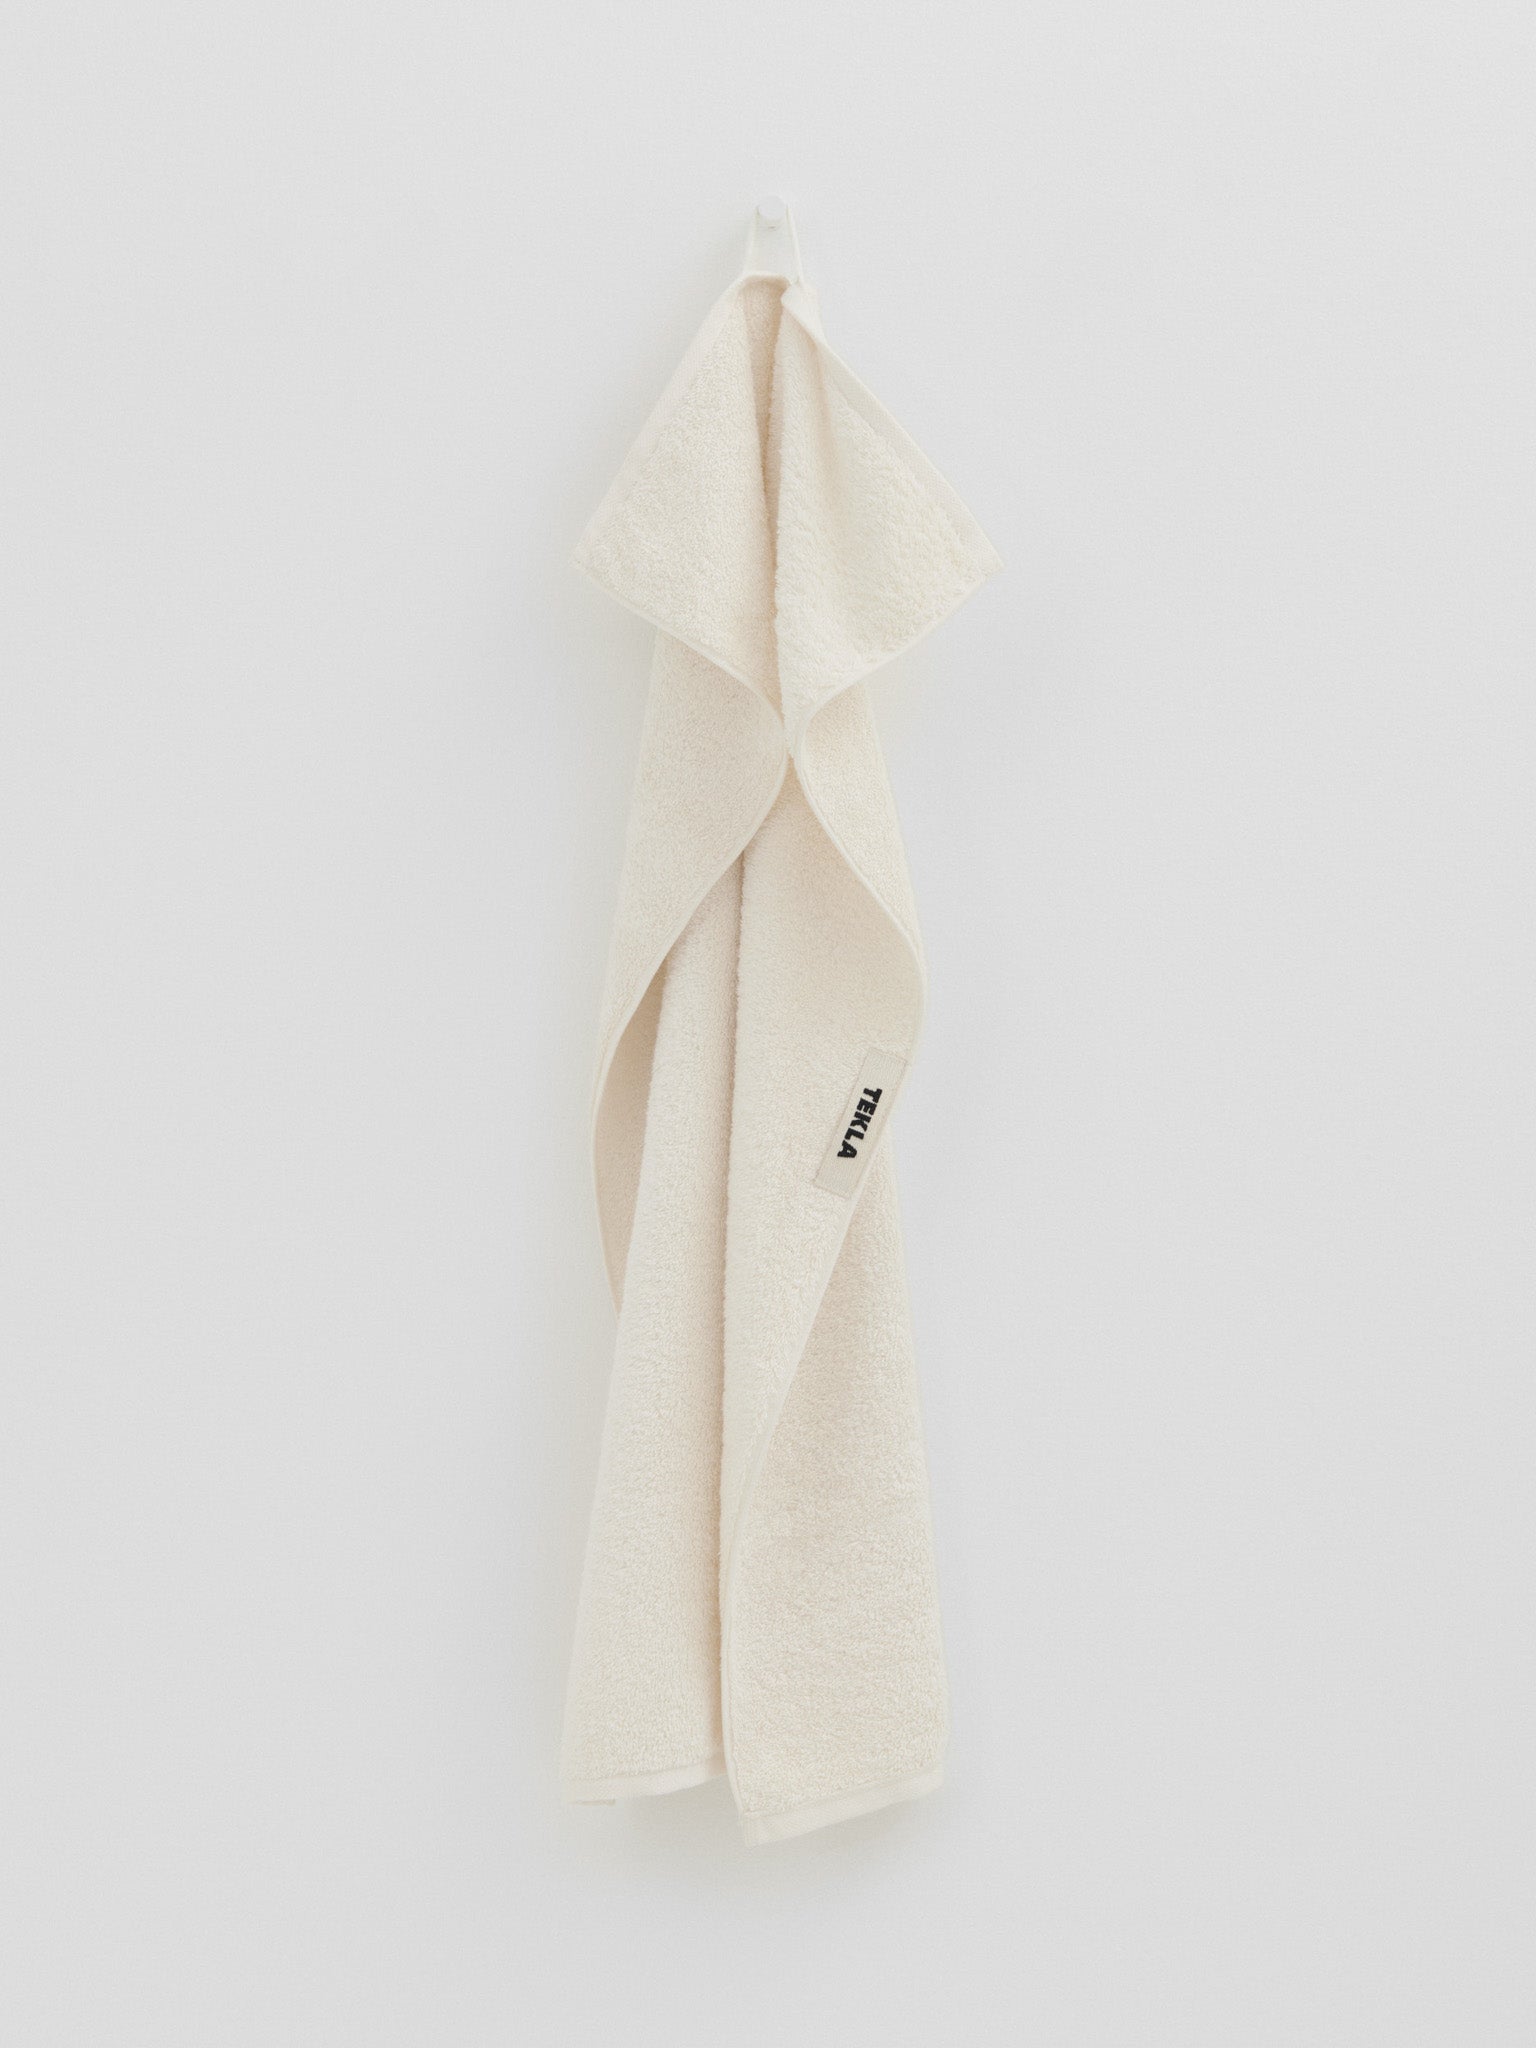 Hand Towel in Ivory